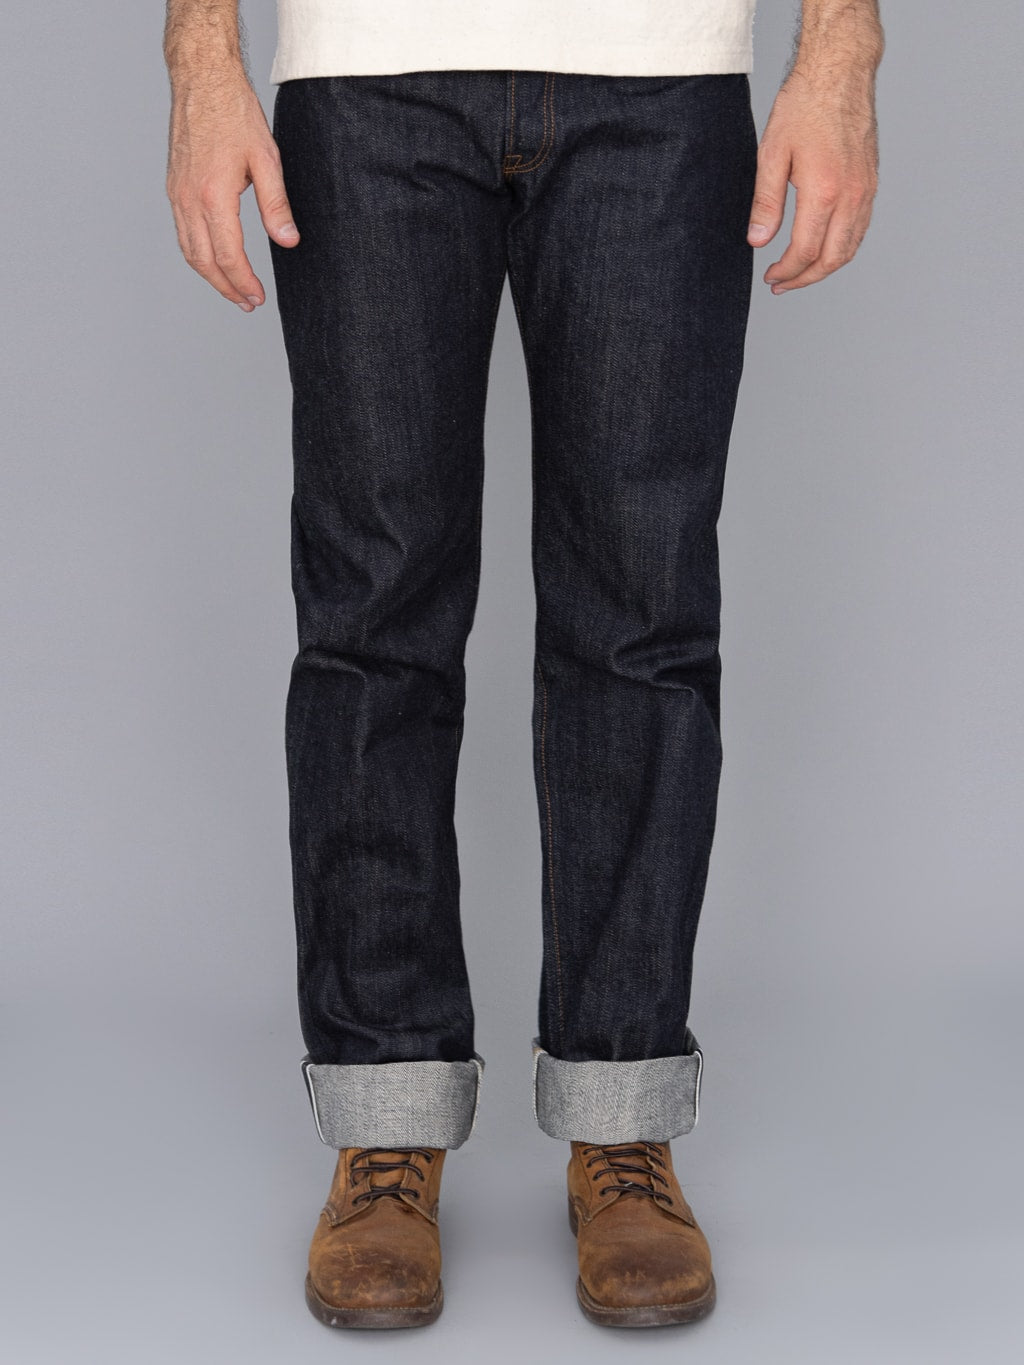 The Flat Head 3009 14.5oz straight tapered Jeans front